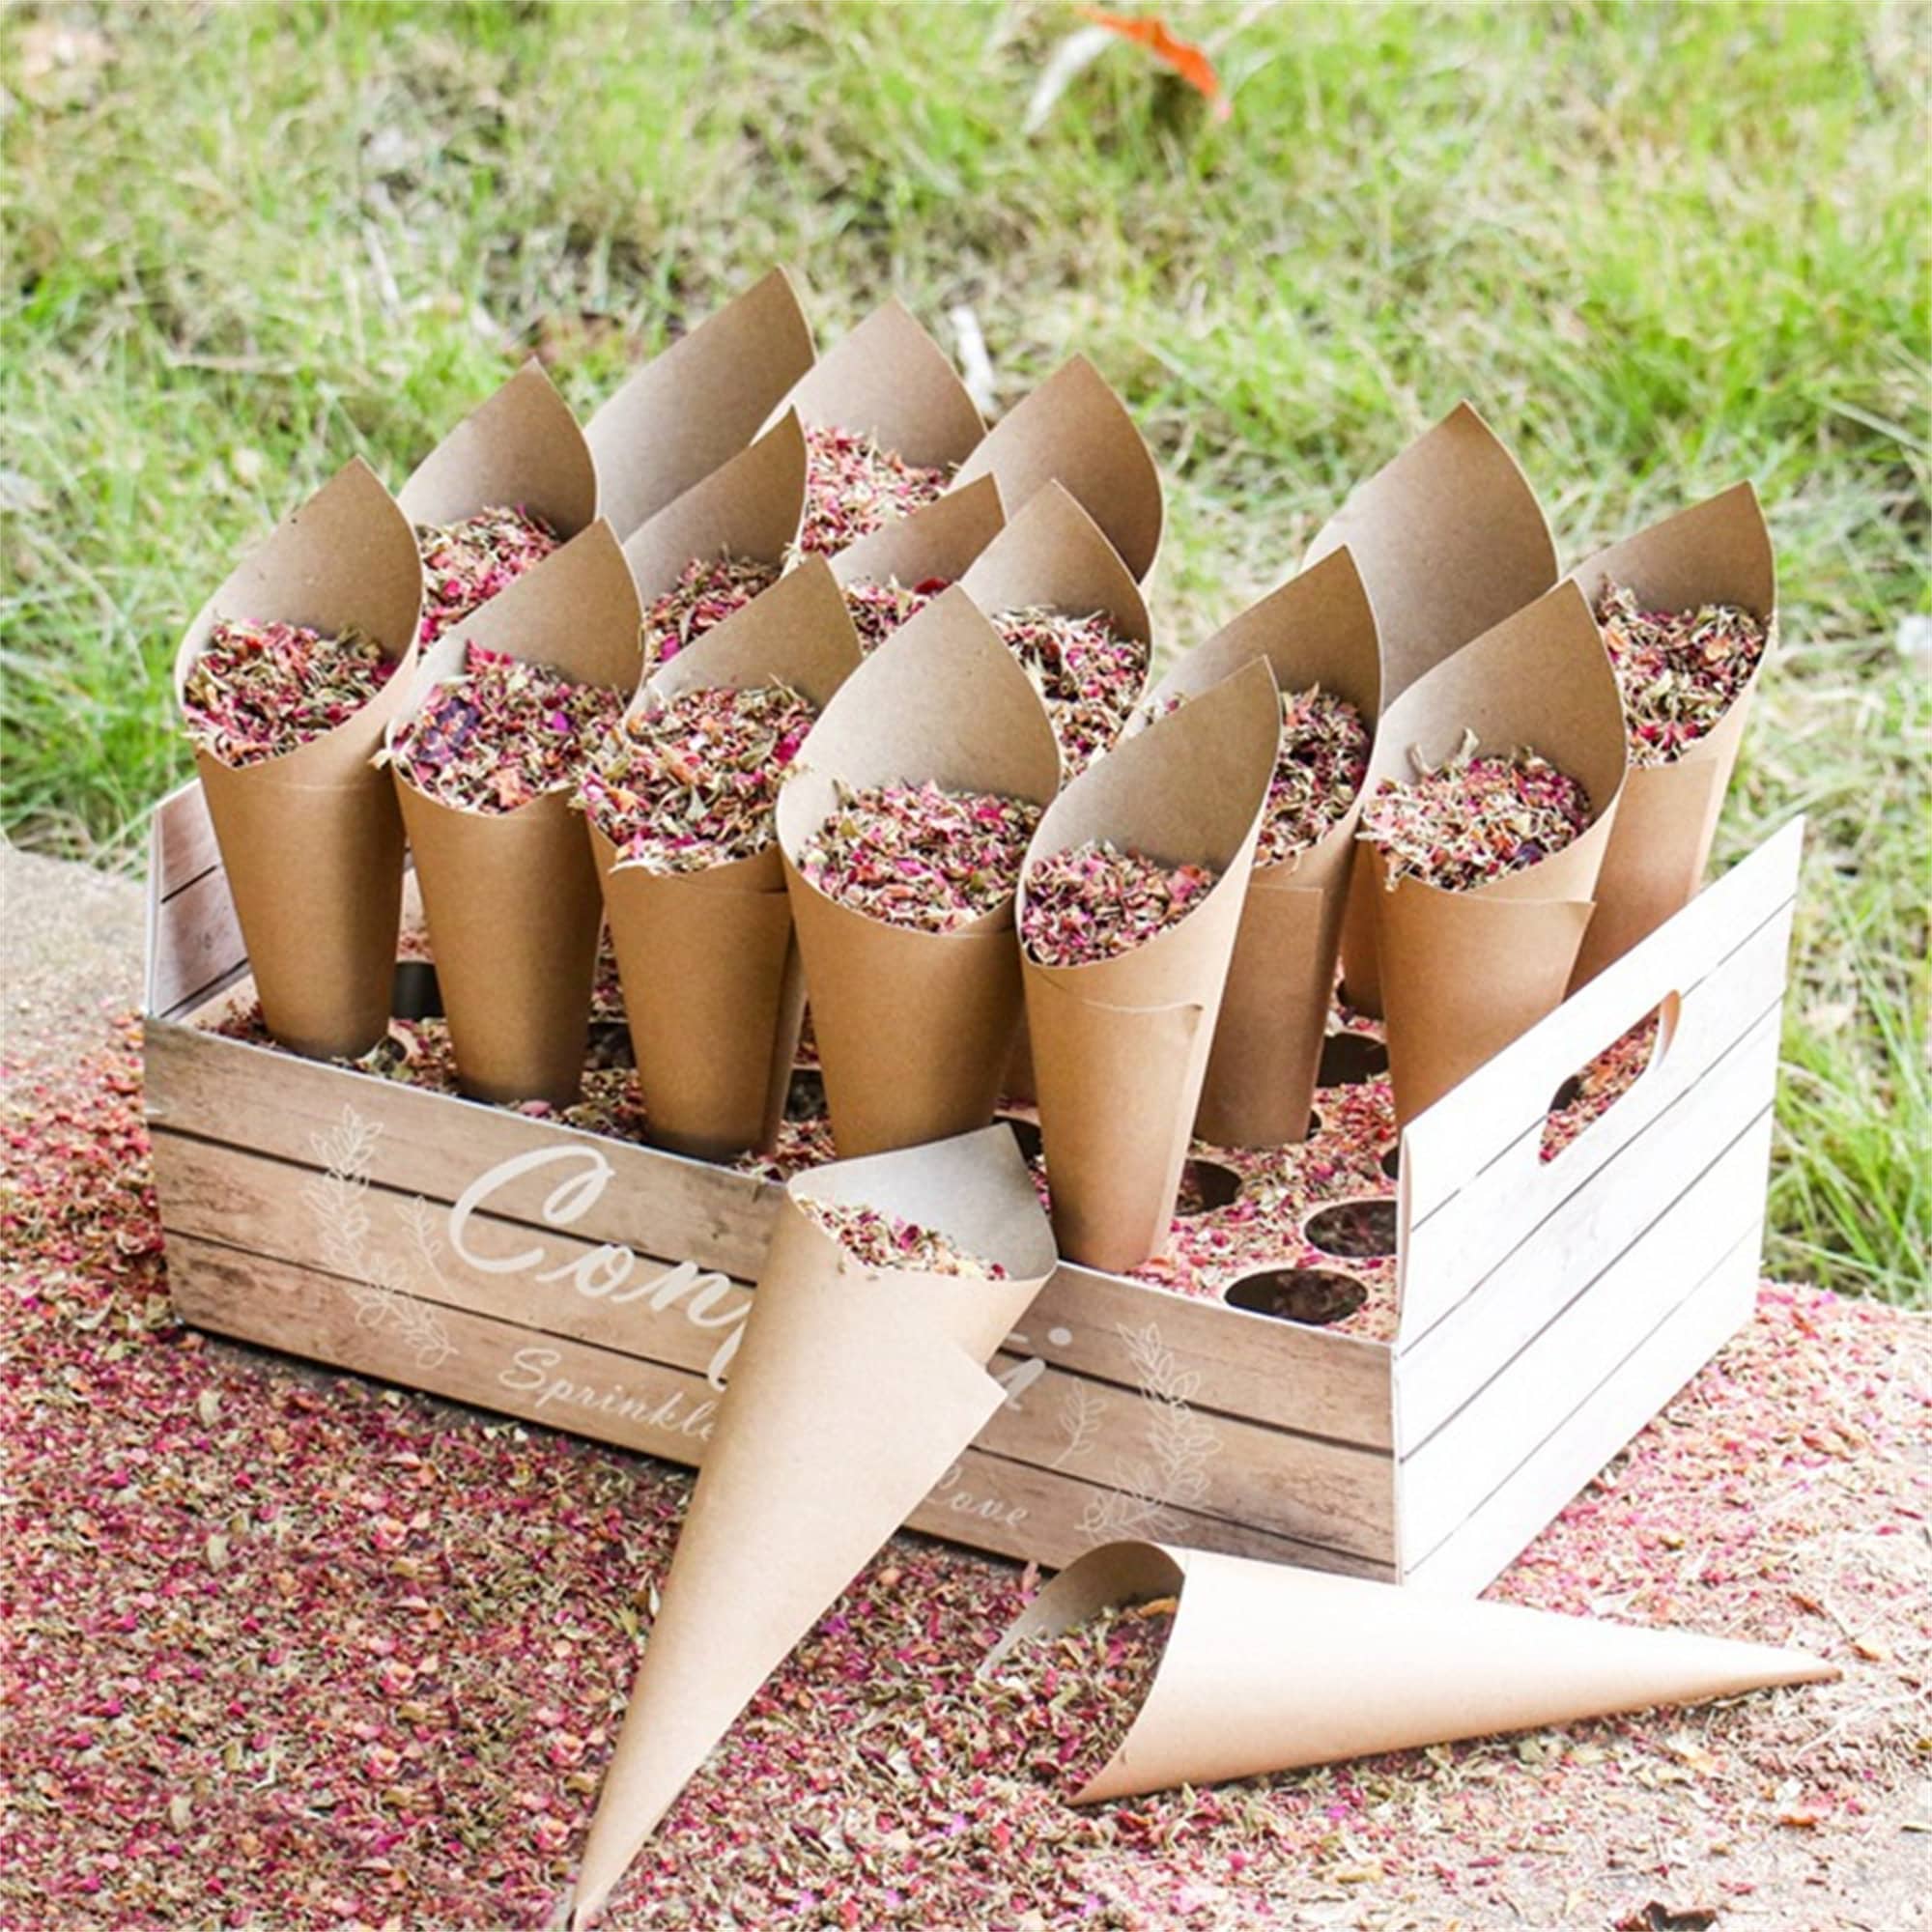 ERINGOGO 40 Pcs Paper Cones for Crafts Cone Appetizer Holder Cupcake Holder  Hollow Flower Cone Wedding Party Favors Paper Food Cones Dried Flower